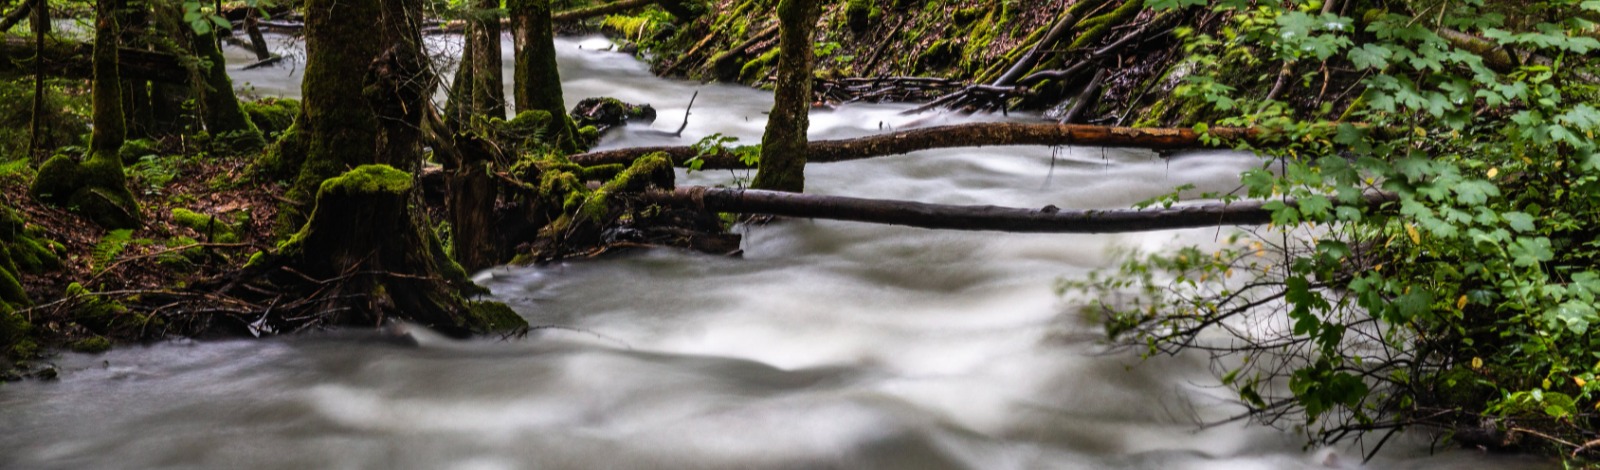 water rushing through forest